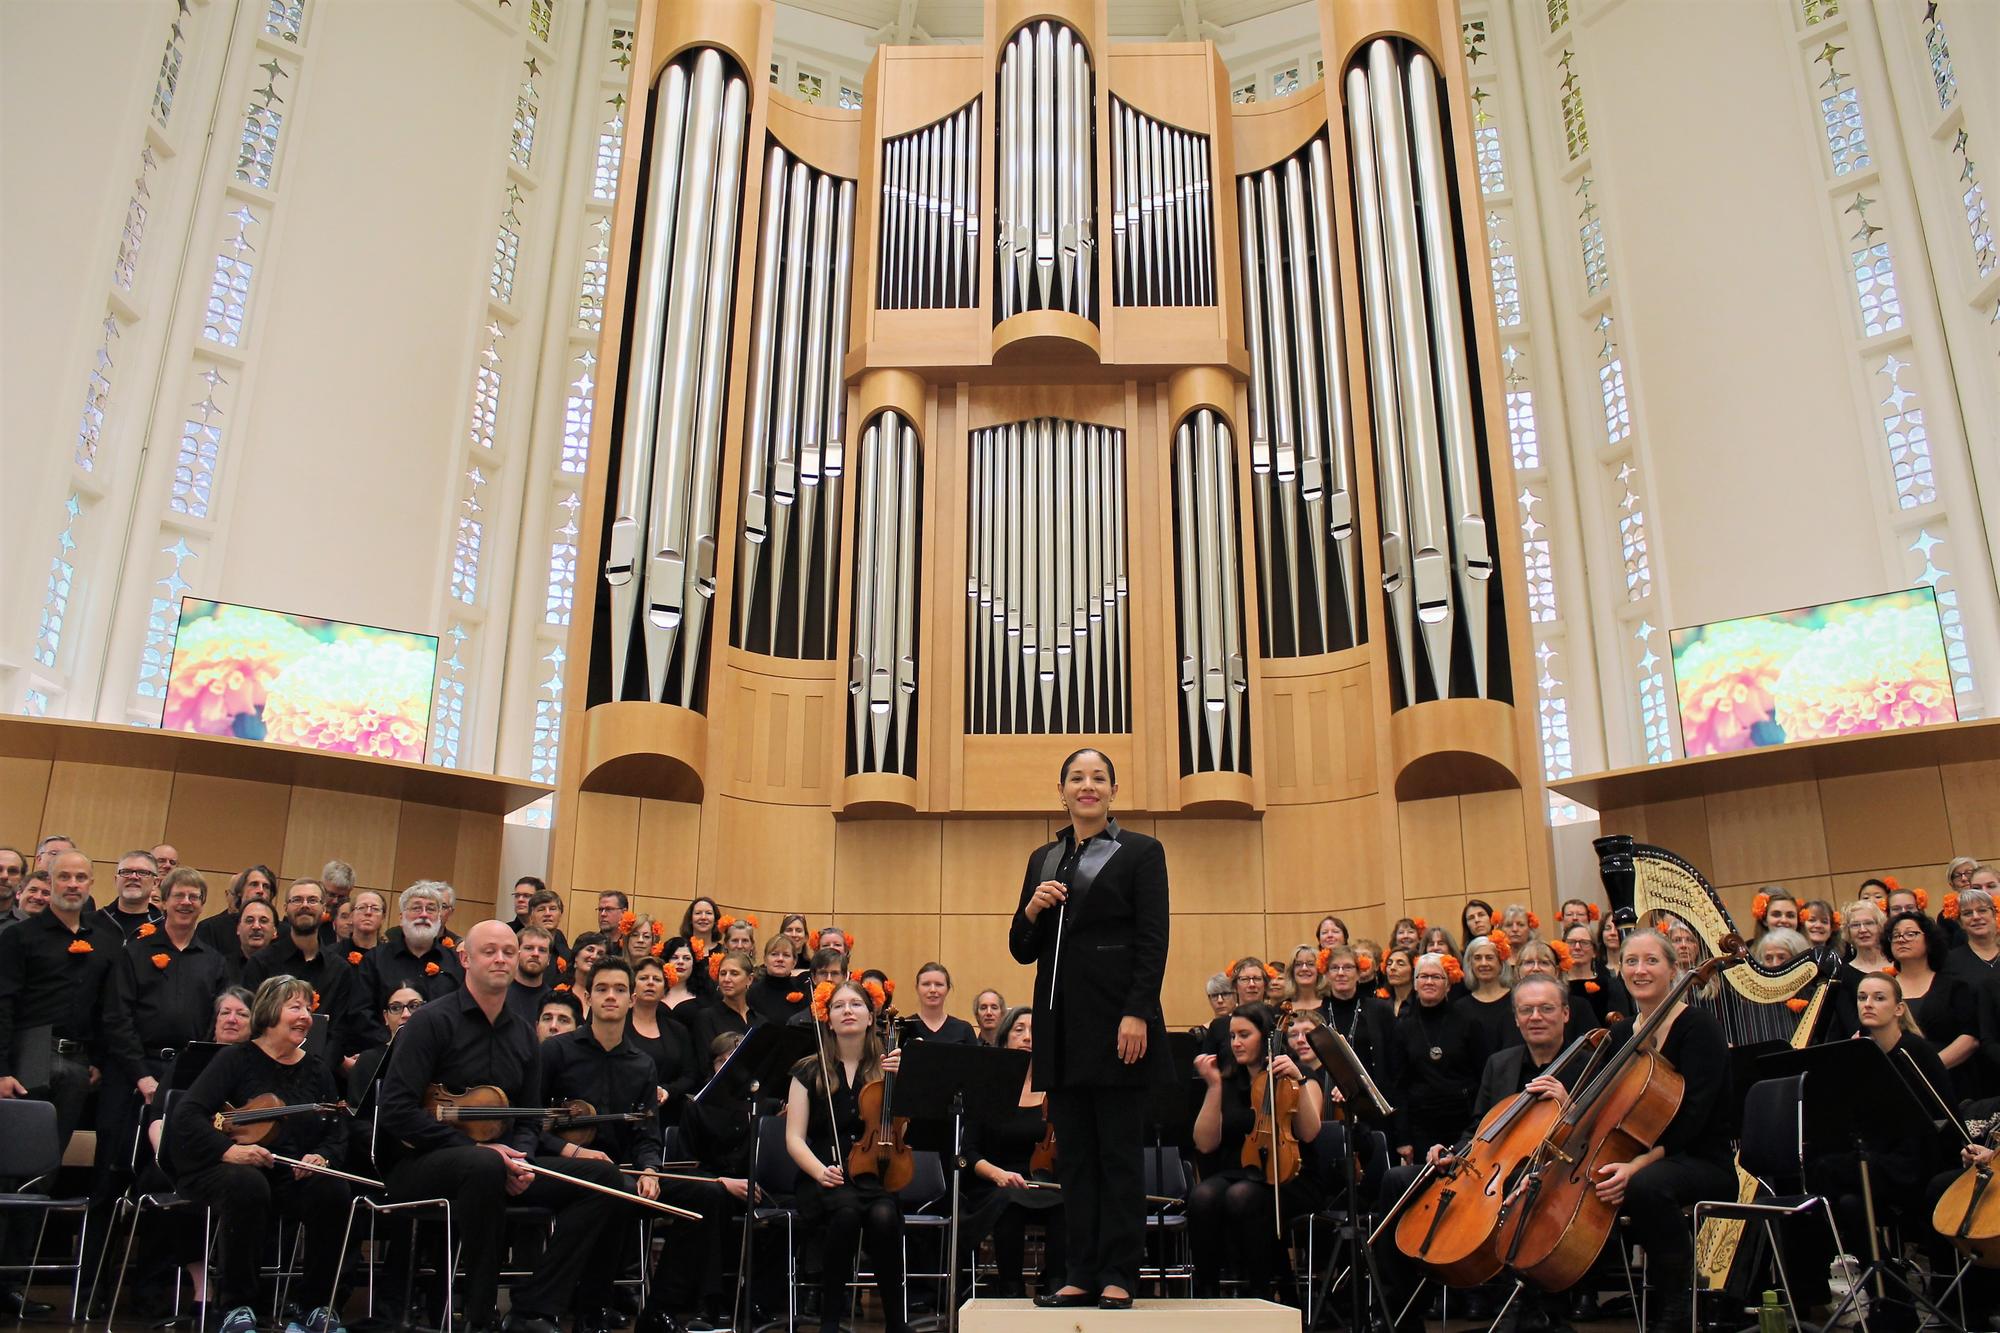 Paula Nava Madrigal stands amid an orchestra in front of a large concert organ